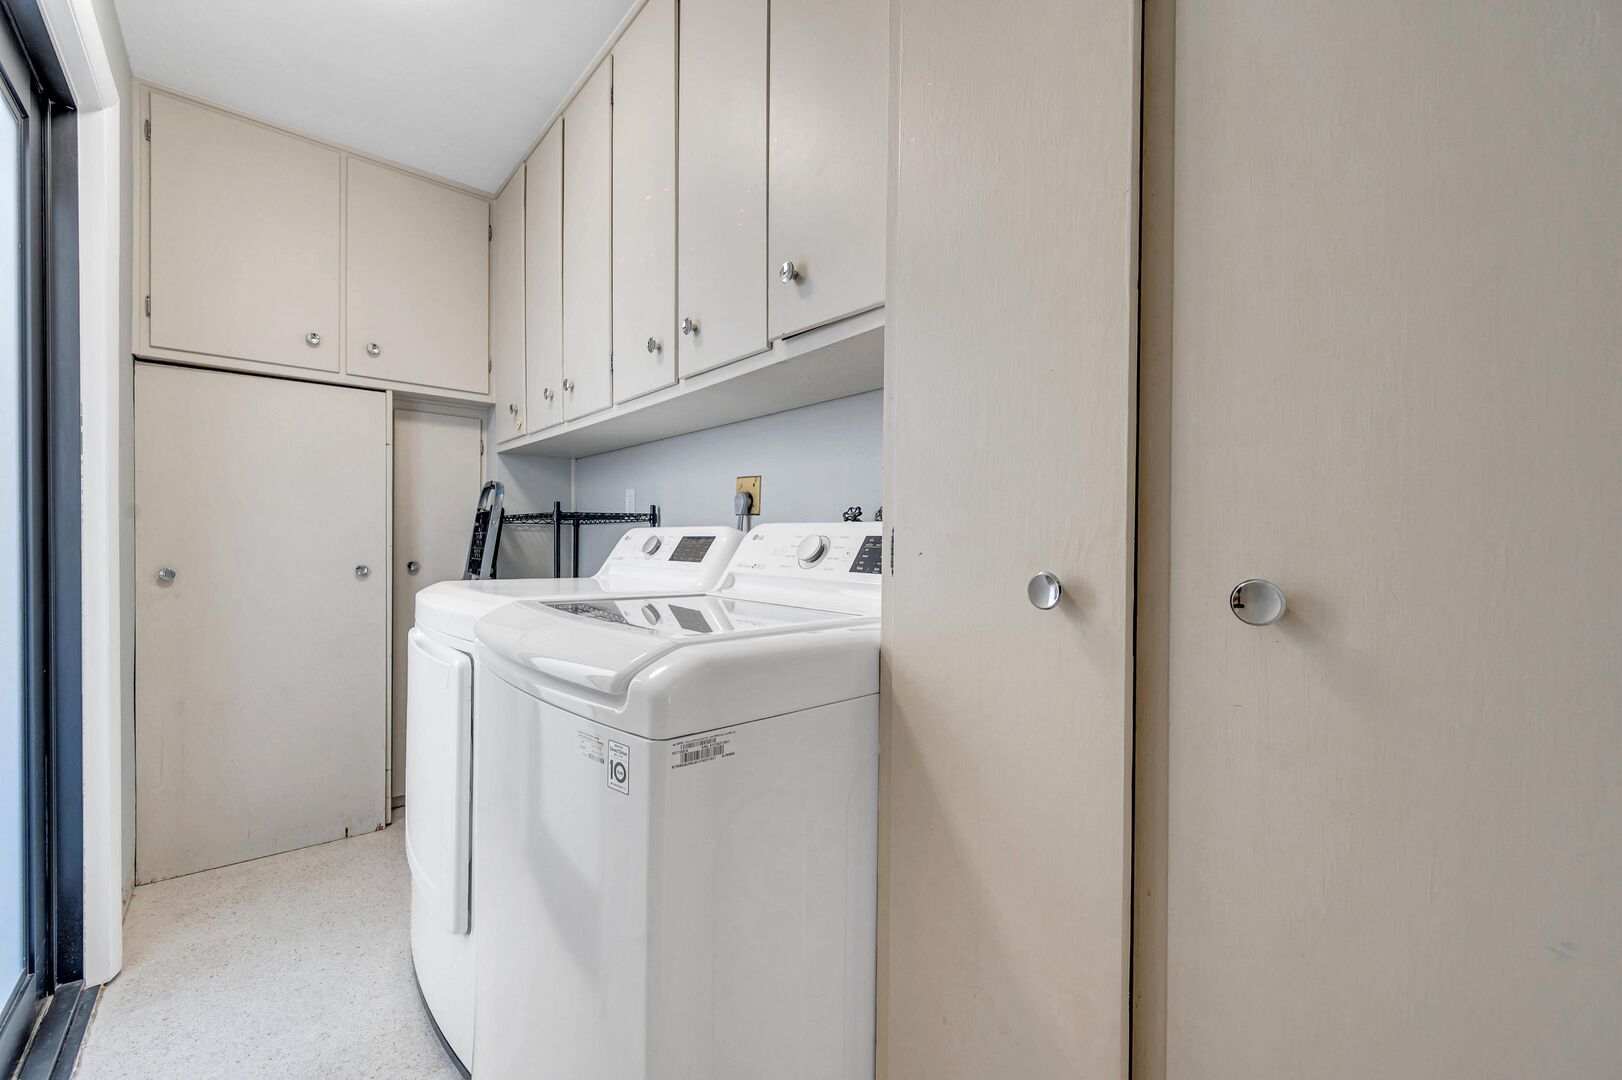 Laundry room equipped with a washer and dryer.